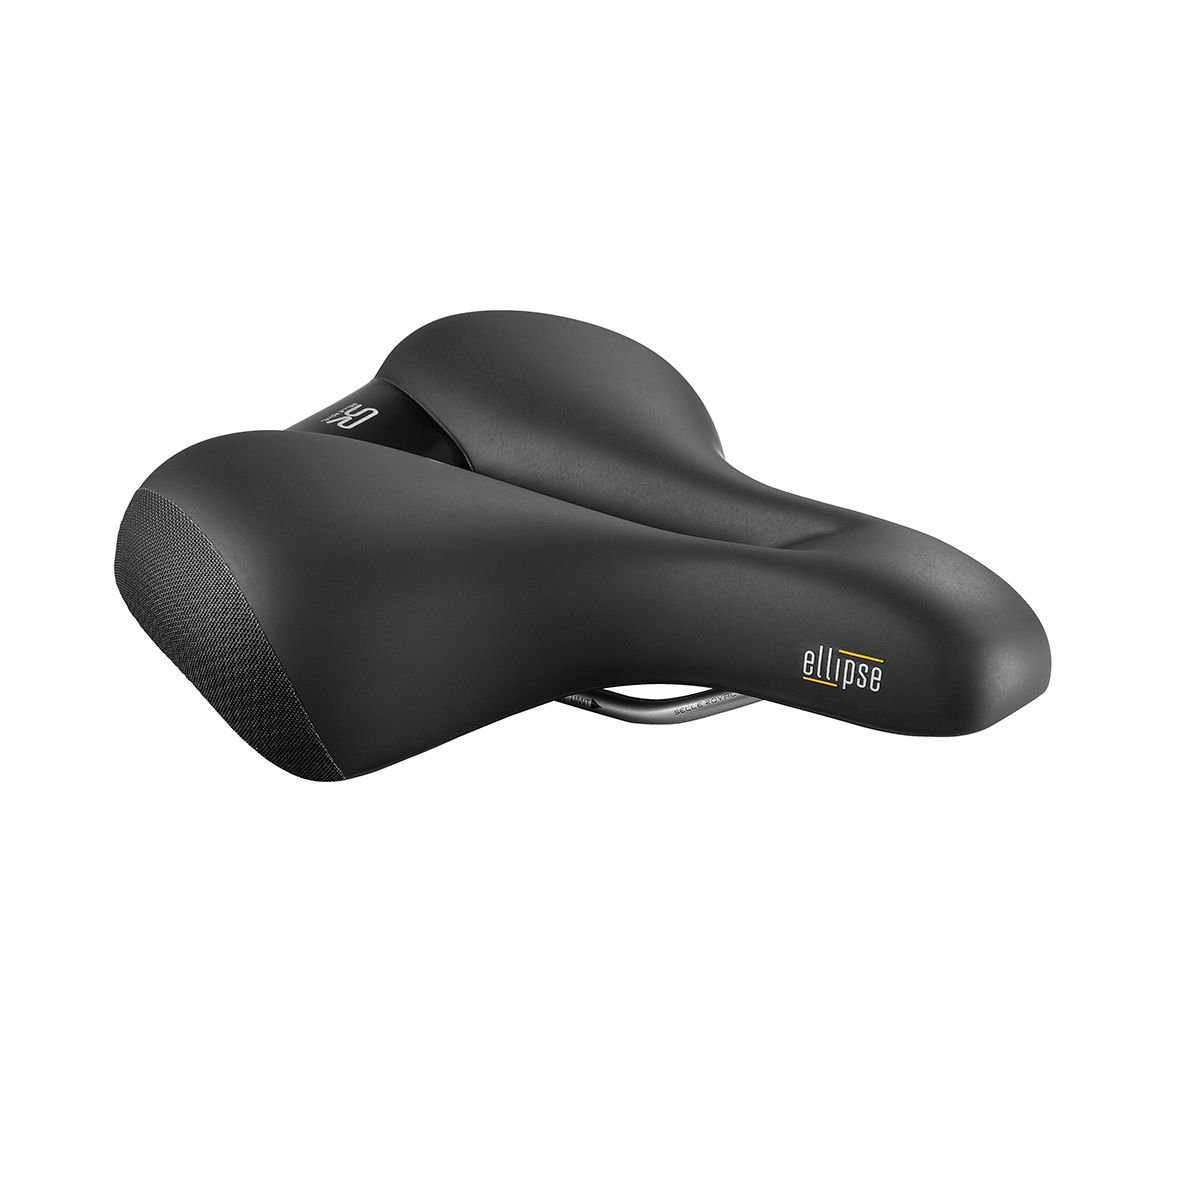 Седло Selle Royal Ellipse Relaxed, унисекс, 51B7UE0A09321 седло selle royal freeport holland classic relaxed